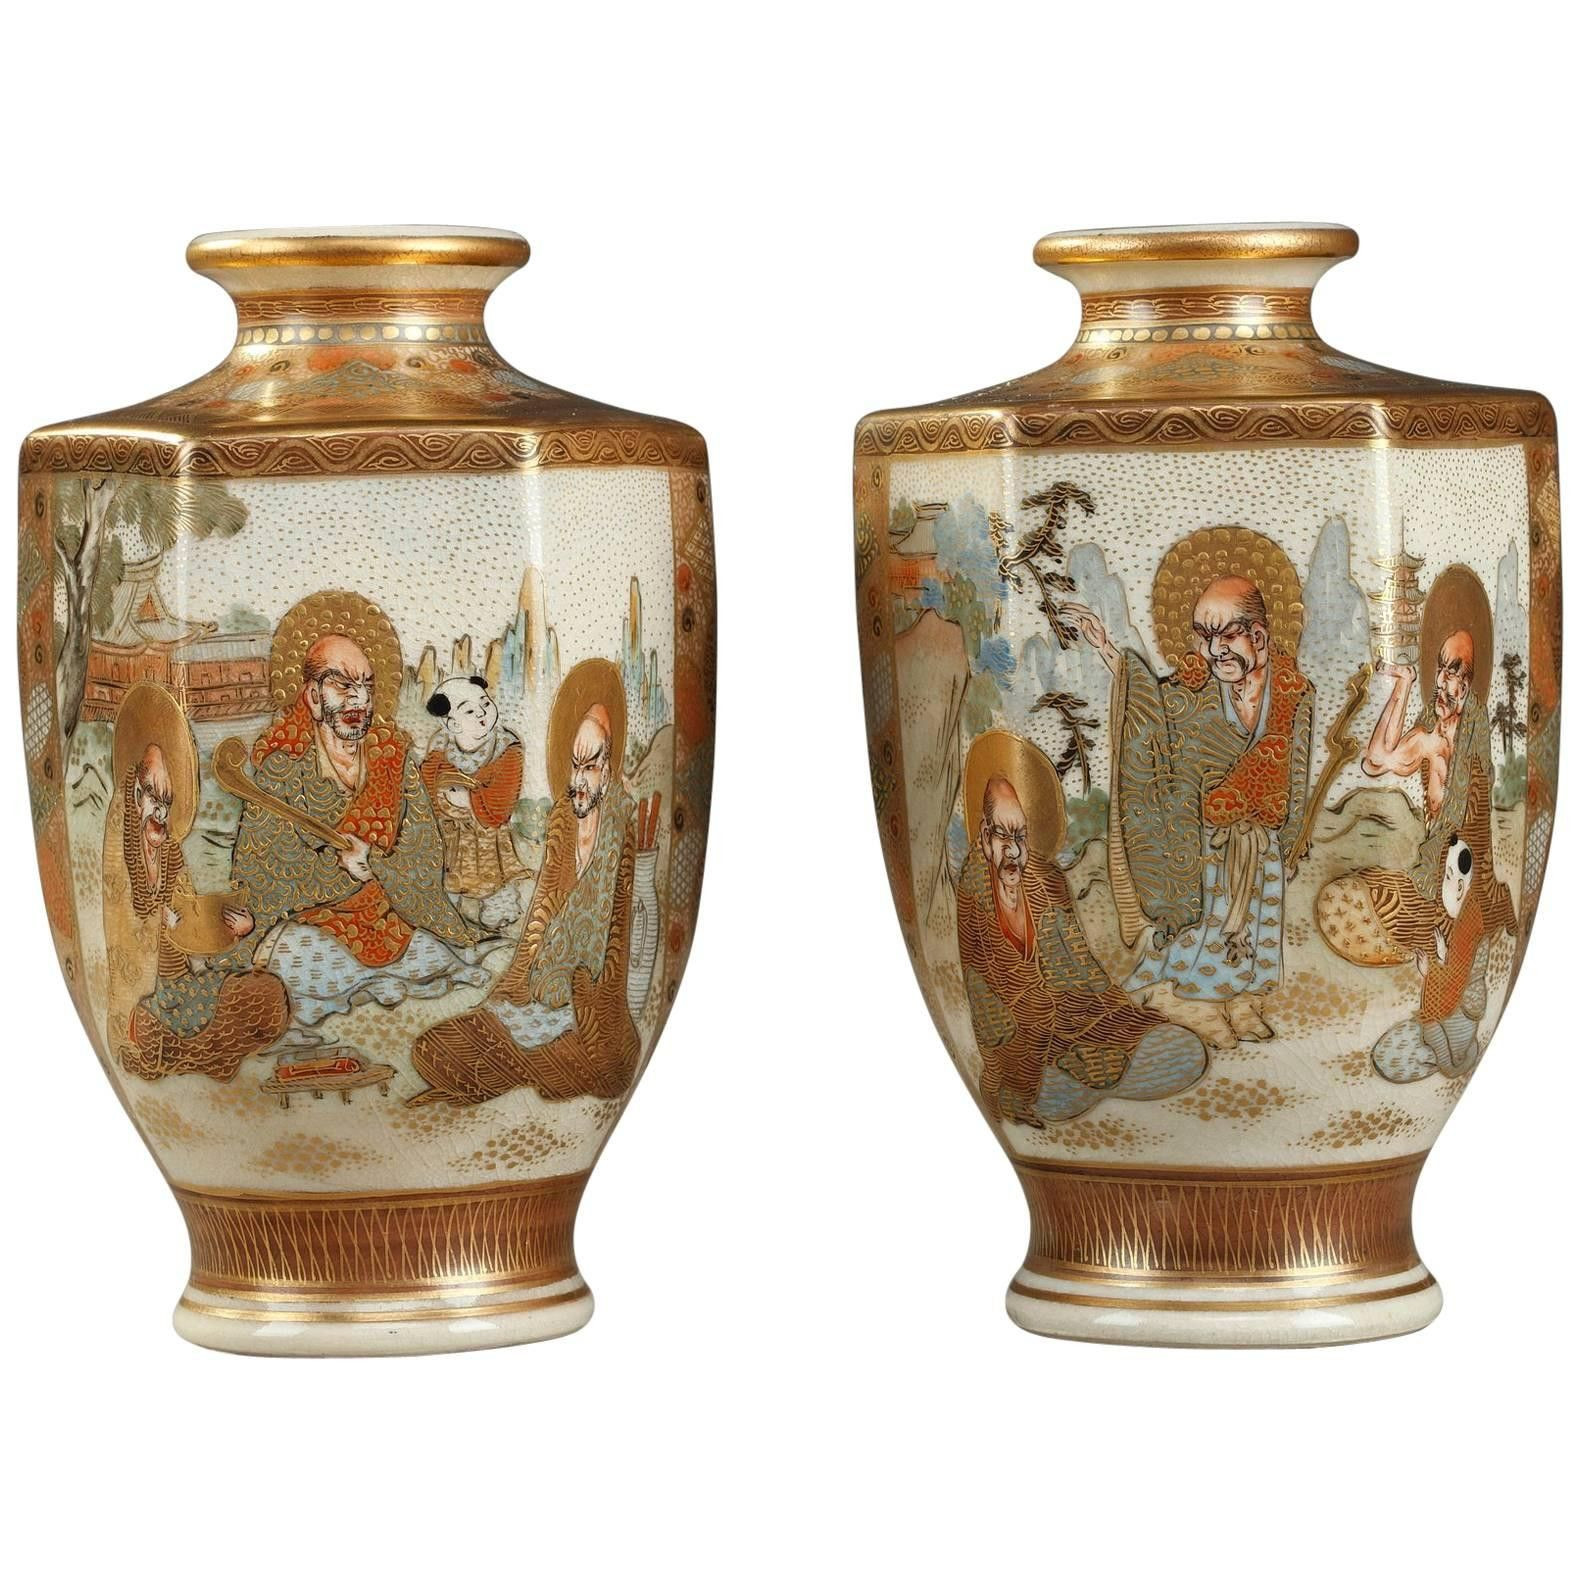 12 Popular Old Vases for Sale 2024 free download old vases for sale of 18 mid century glass vase the weekly world within chinese ginger jar table lamps new vases chinese vase with lid